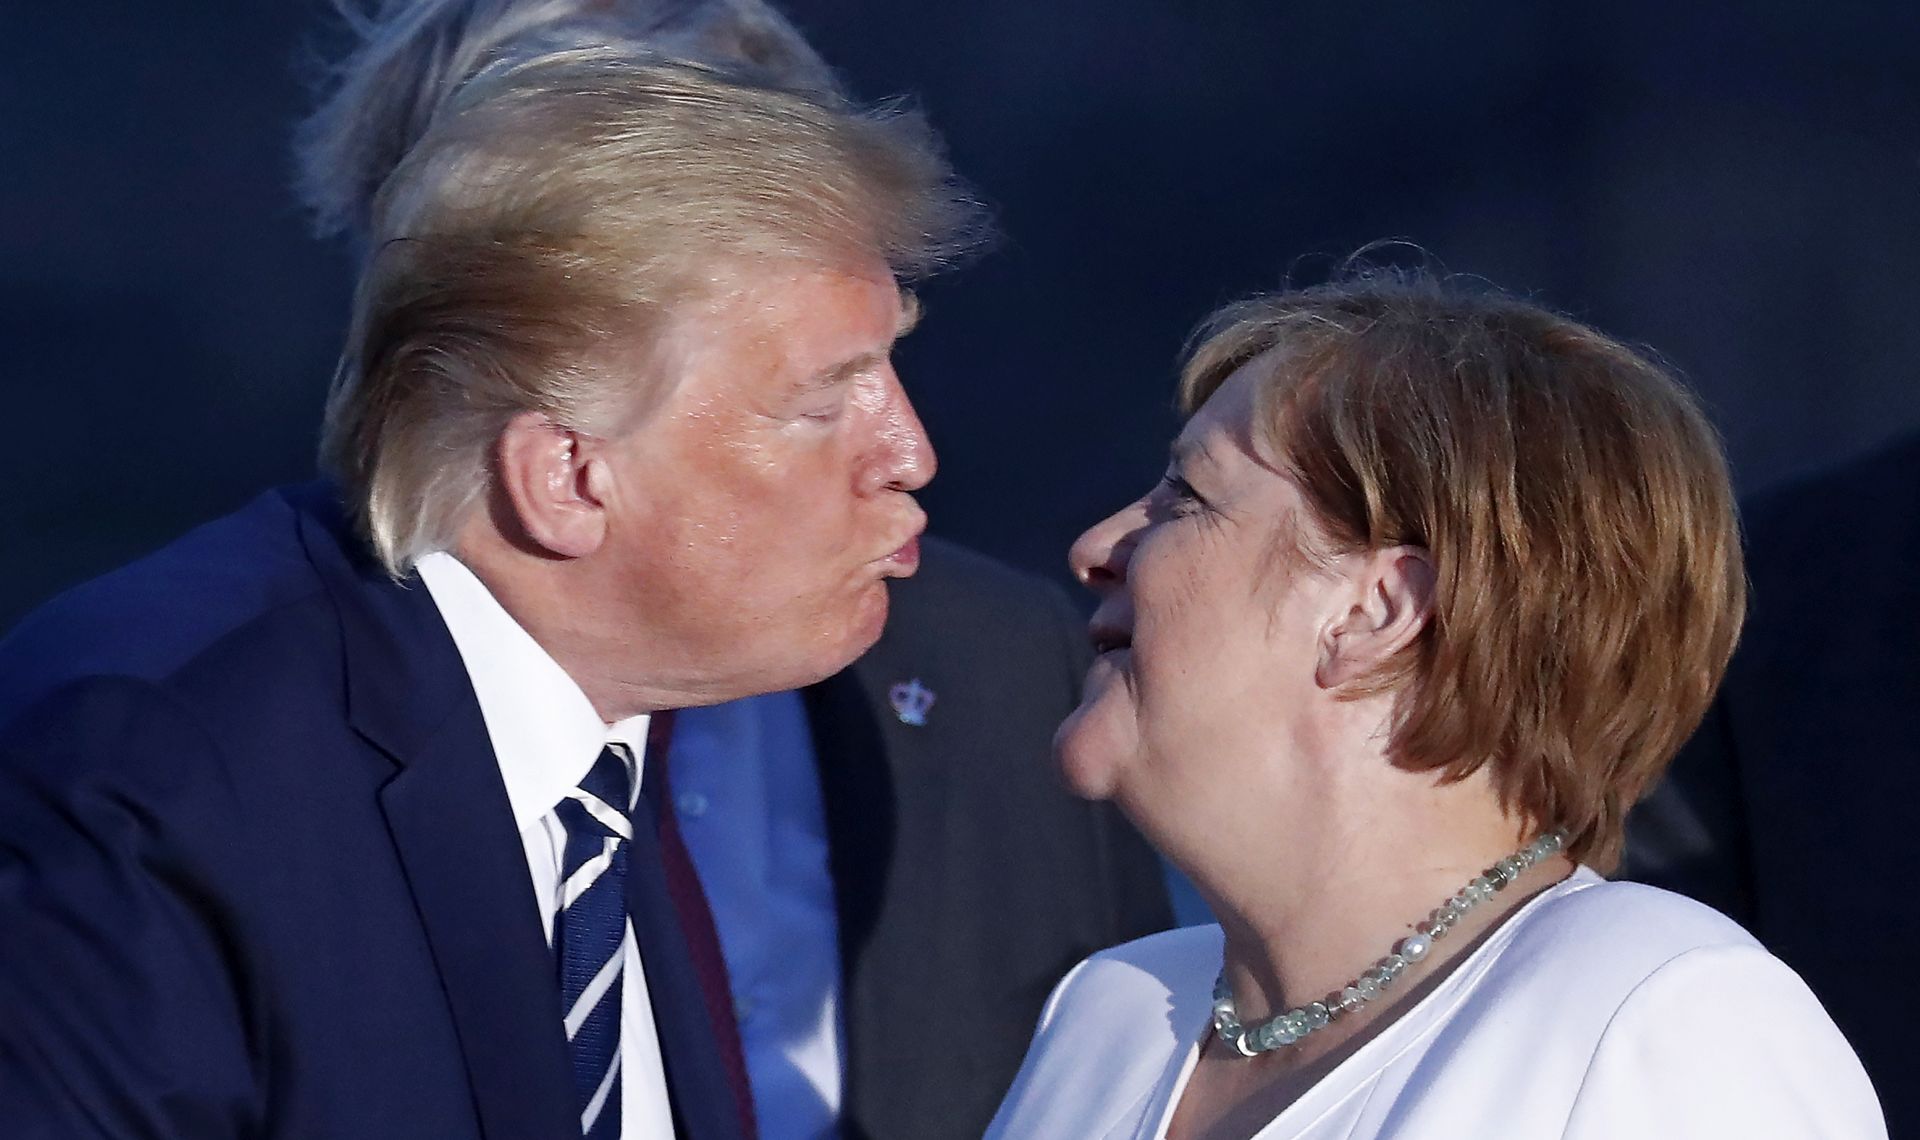 epa07793896 US President Donald J. Trump (L) kisses German Chancellor Angela Merkel (R) as they pose for the family photo during the G7 summit at Casino in Biarritz, France, 25 August 2019. The G7 Summit runs from 24 to 26 August in Biarritz.  EPA/IAN LANGSDON